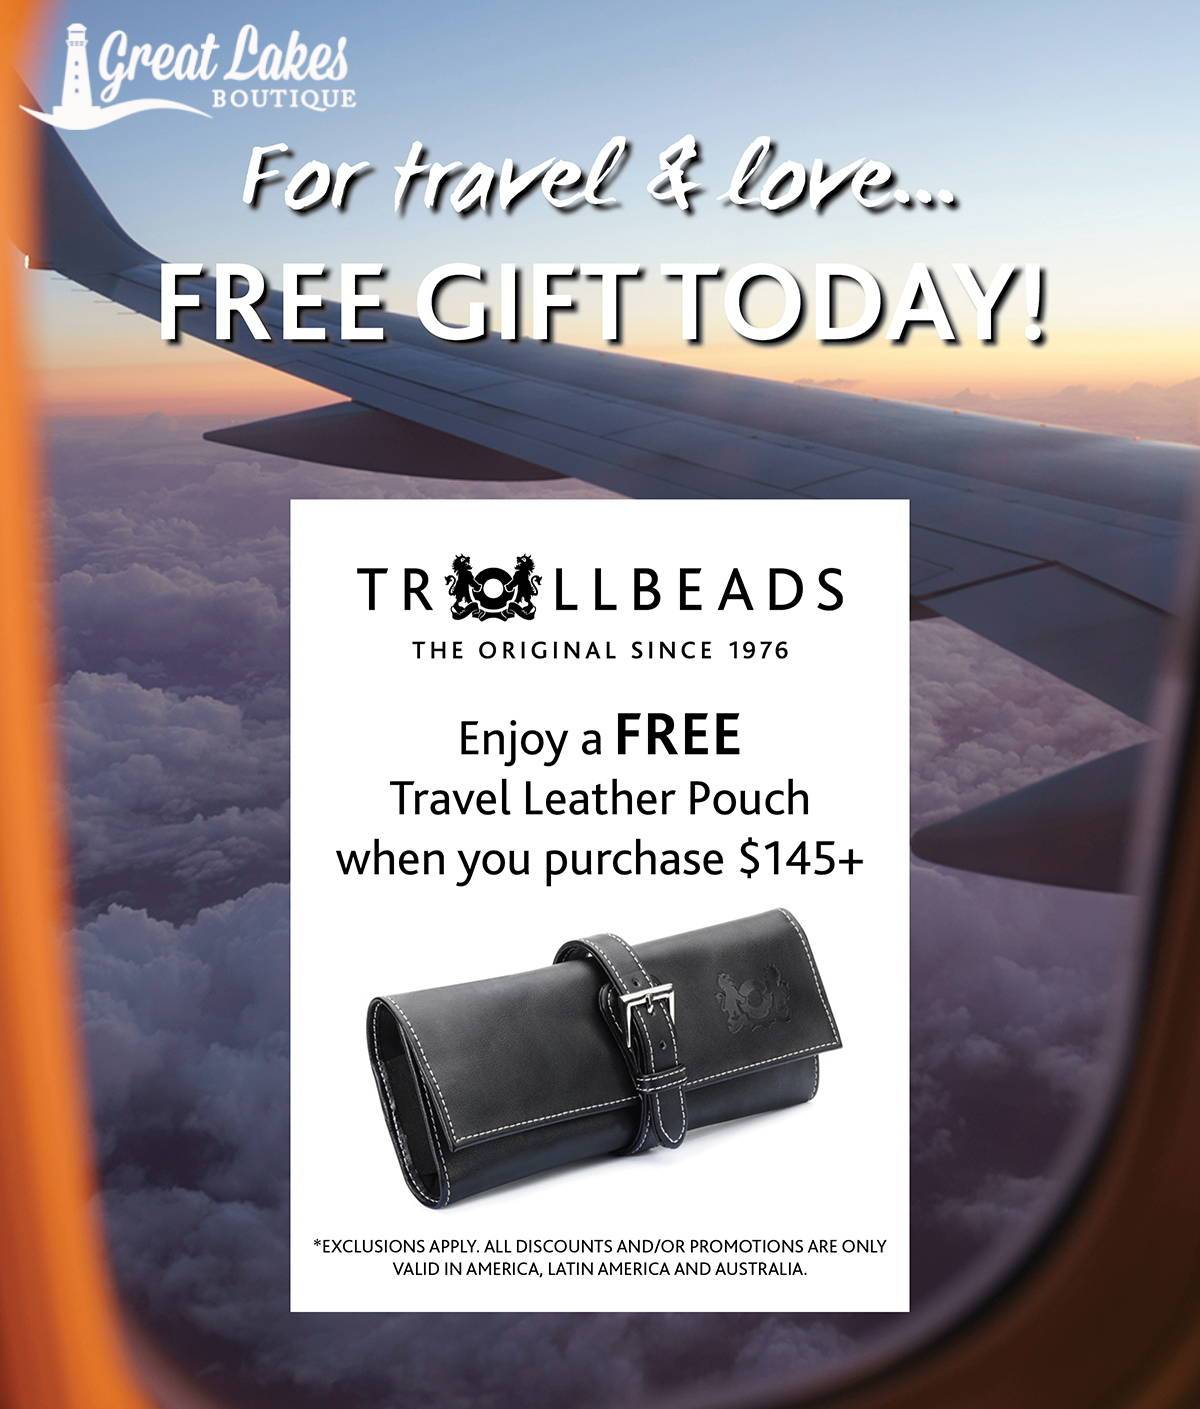 Trollbeads Travel Leather Pouch Gift with Purchase Promotion